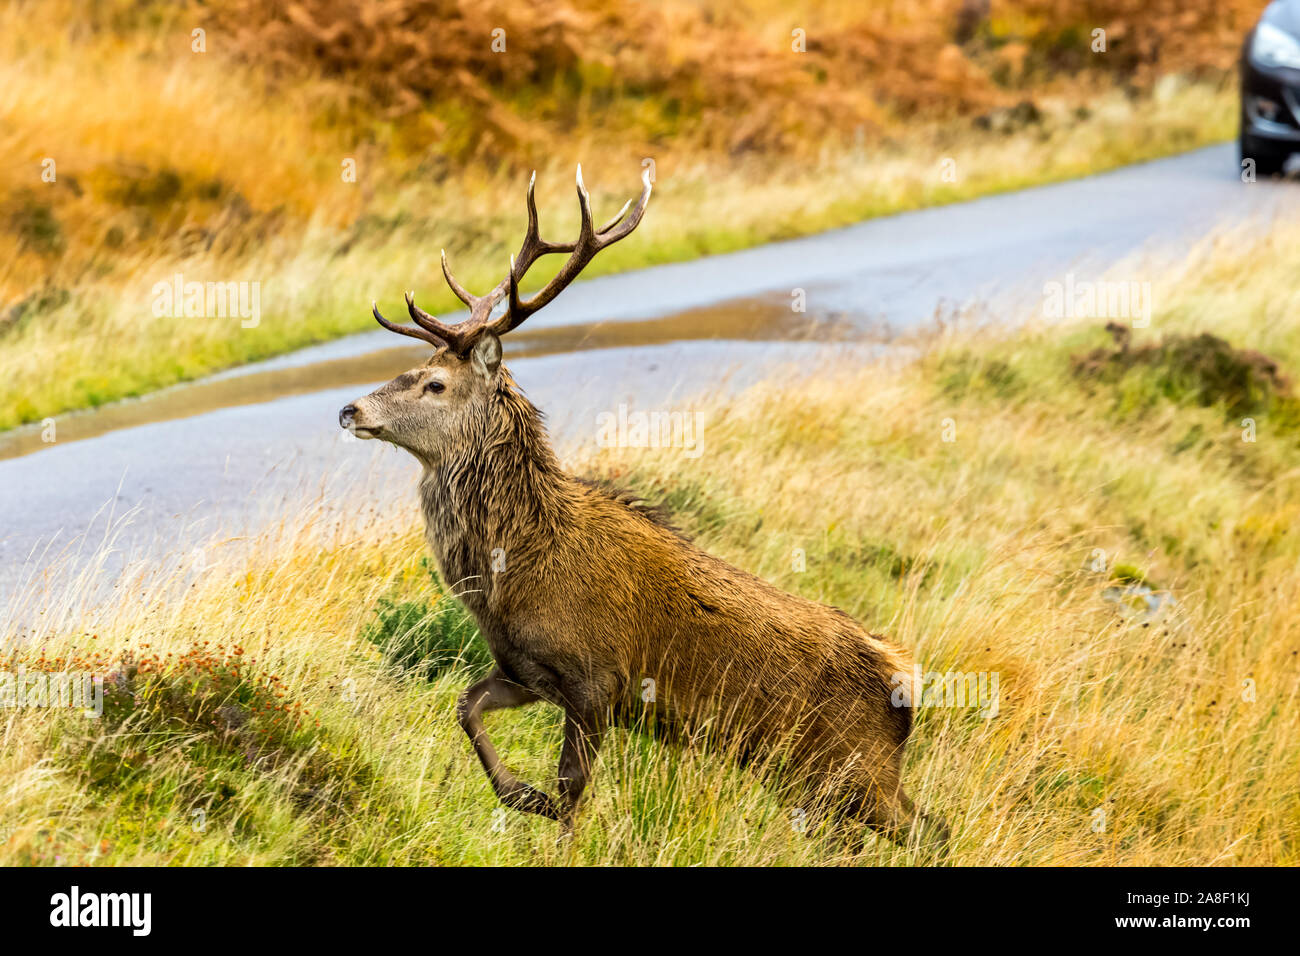 Red deer stag (latin name: Cervus elaphus) in Autumn. The Monarch of the Glen, about to cross a single track road with car approaching.  Glen Strathfa Stock Photo